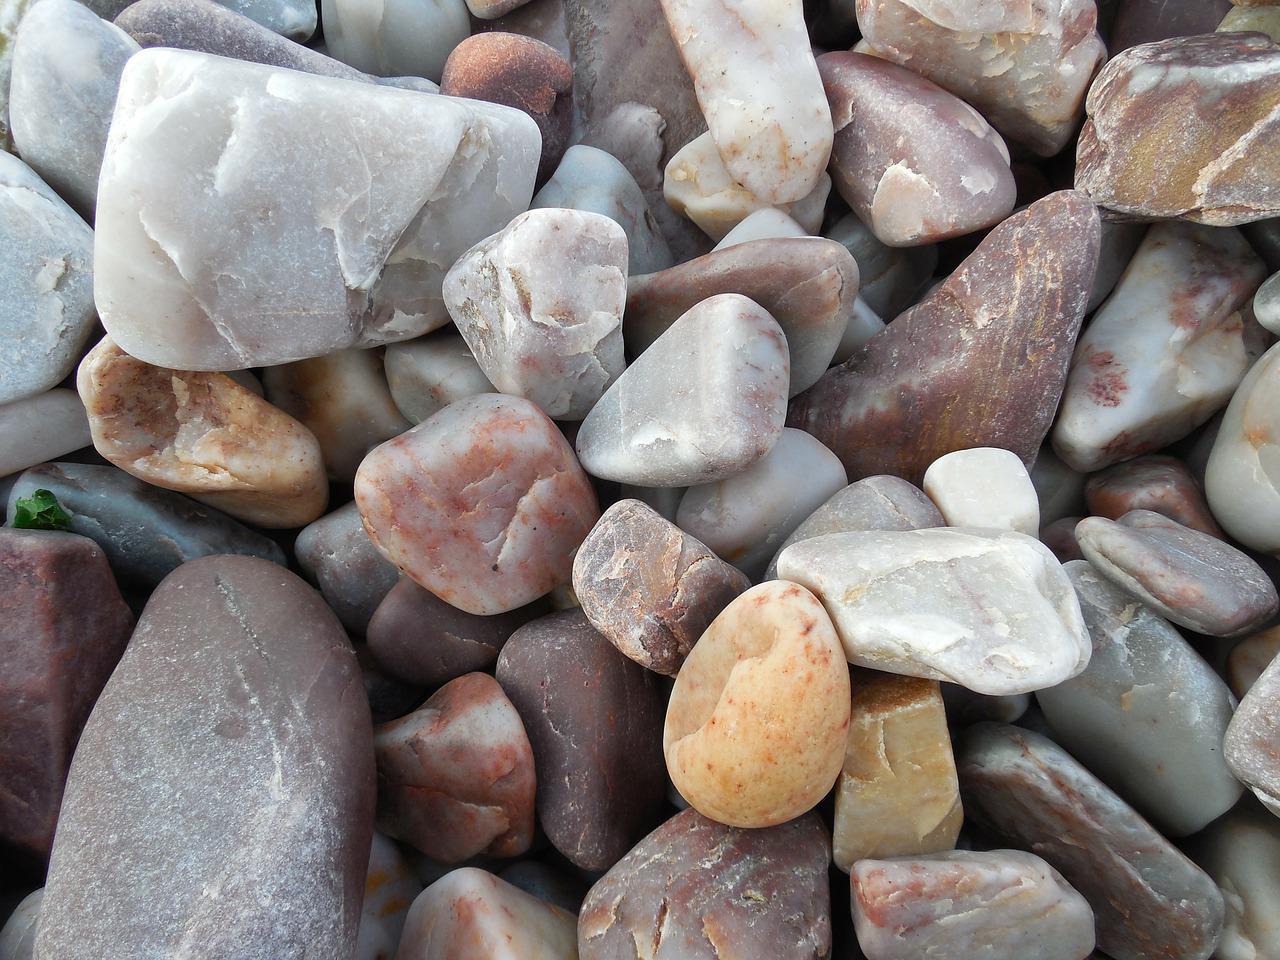 Image of rocks from Pixabay